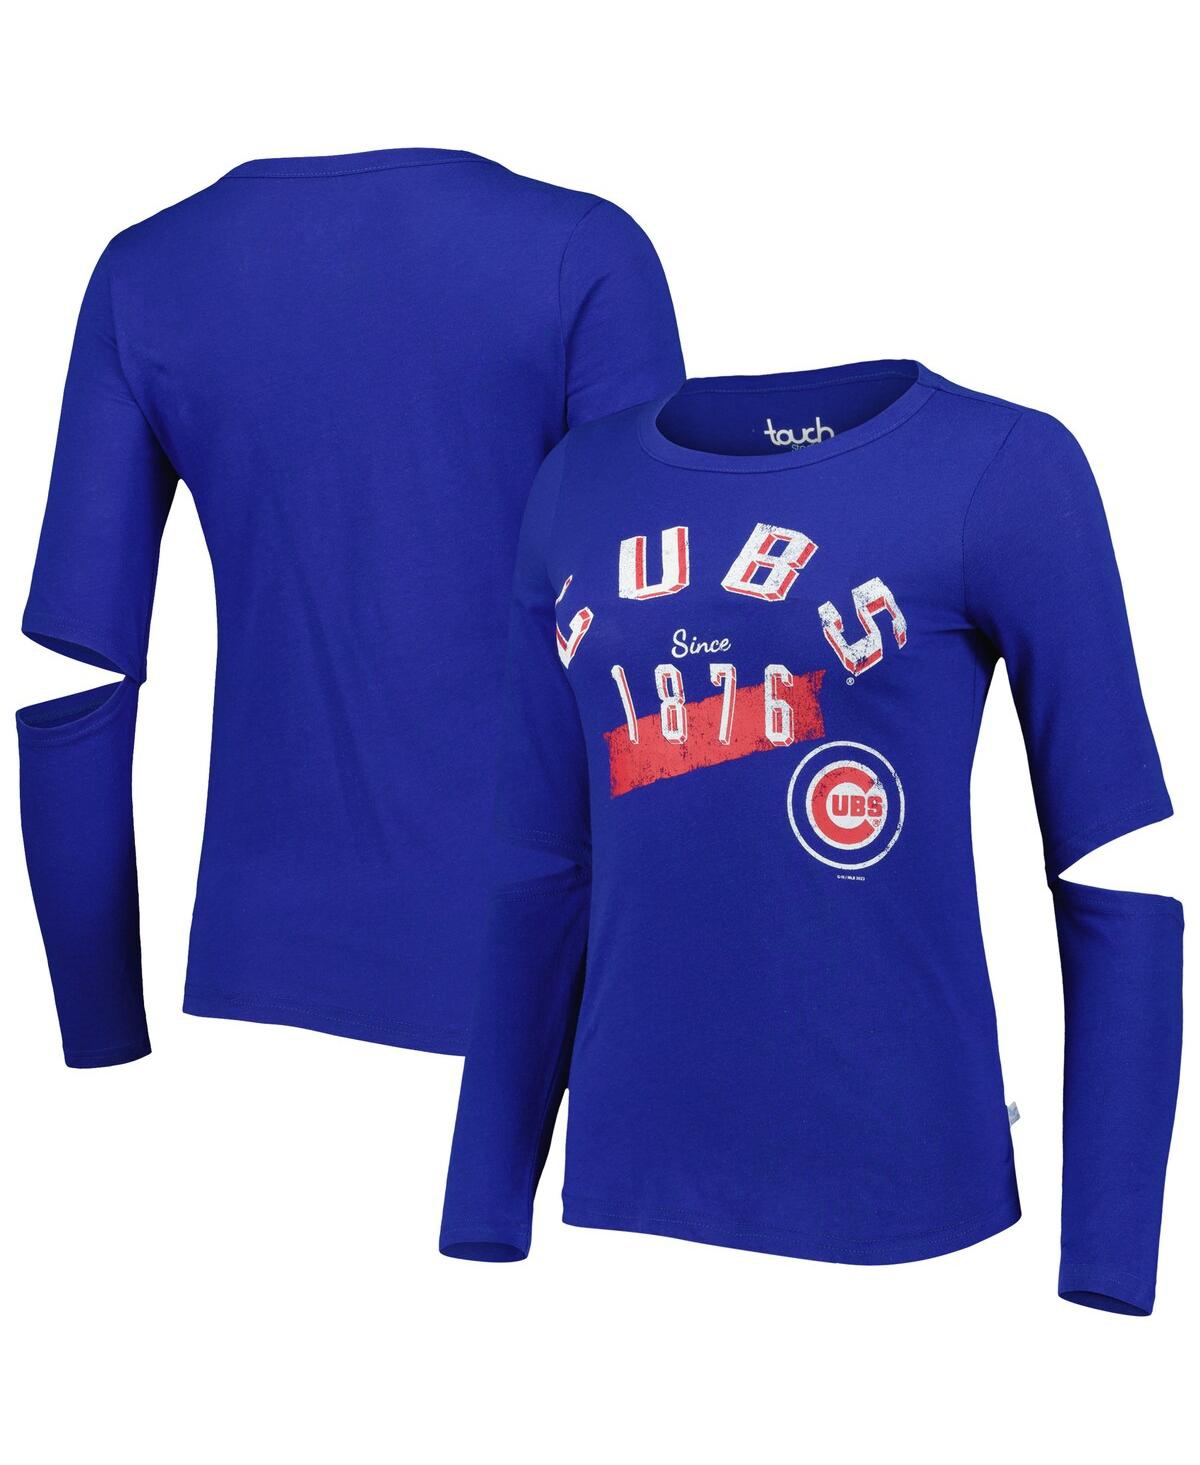 Women's Touch Royal Chicago Cubs Formation Long Sleeve T-shirt - Royal